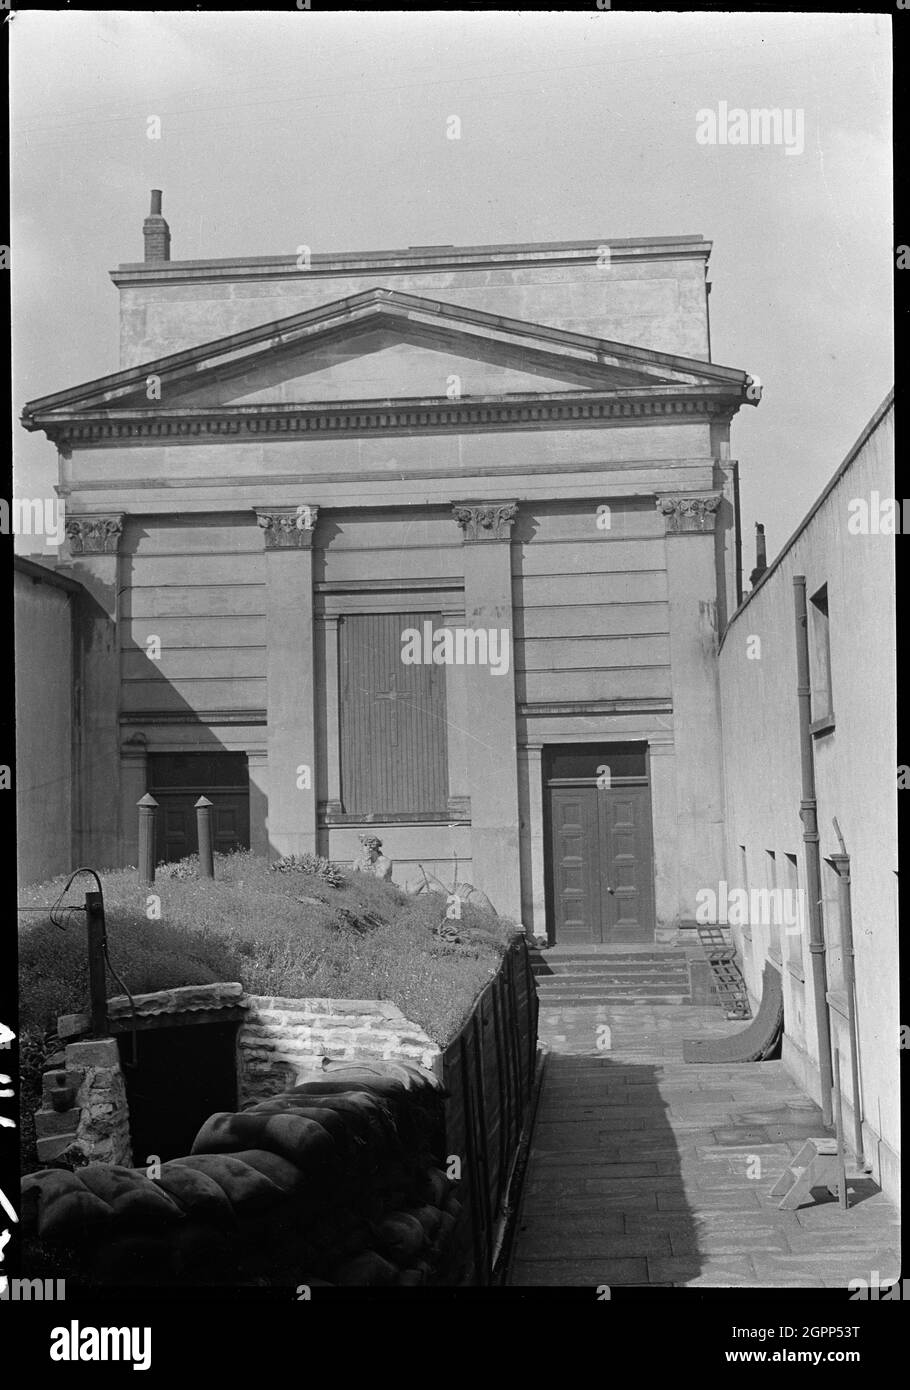 Chapel at Hull Trinity House and statue outside east front, Princes Dock Street, Kingston upon Hull, 1941. An exterior view of the east elevation of Trinity House Chapel, with a partial view of a sculpture of Oceanus and a bomb shelter in the foreground. The chapel dates to 1842, and was built by H. F. Lockwood. The east elevation is rusticated and has four giant Corinthian pilasters supporting a plain frieze and pediment, with the east window in the centre. Flanking the window are pairs of eight-panelled doors with stone pilasters and rectangular overlights. In front of the east window is a s Stock Photo